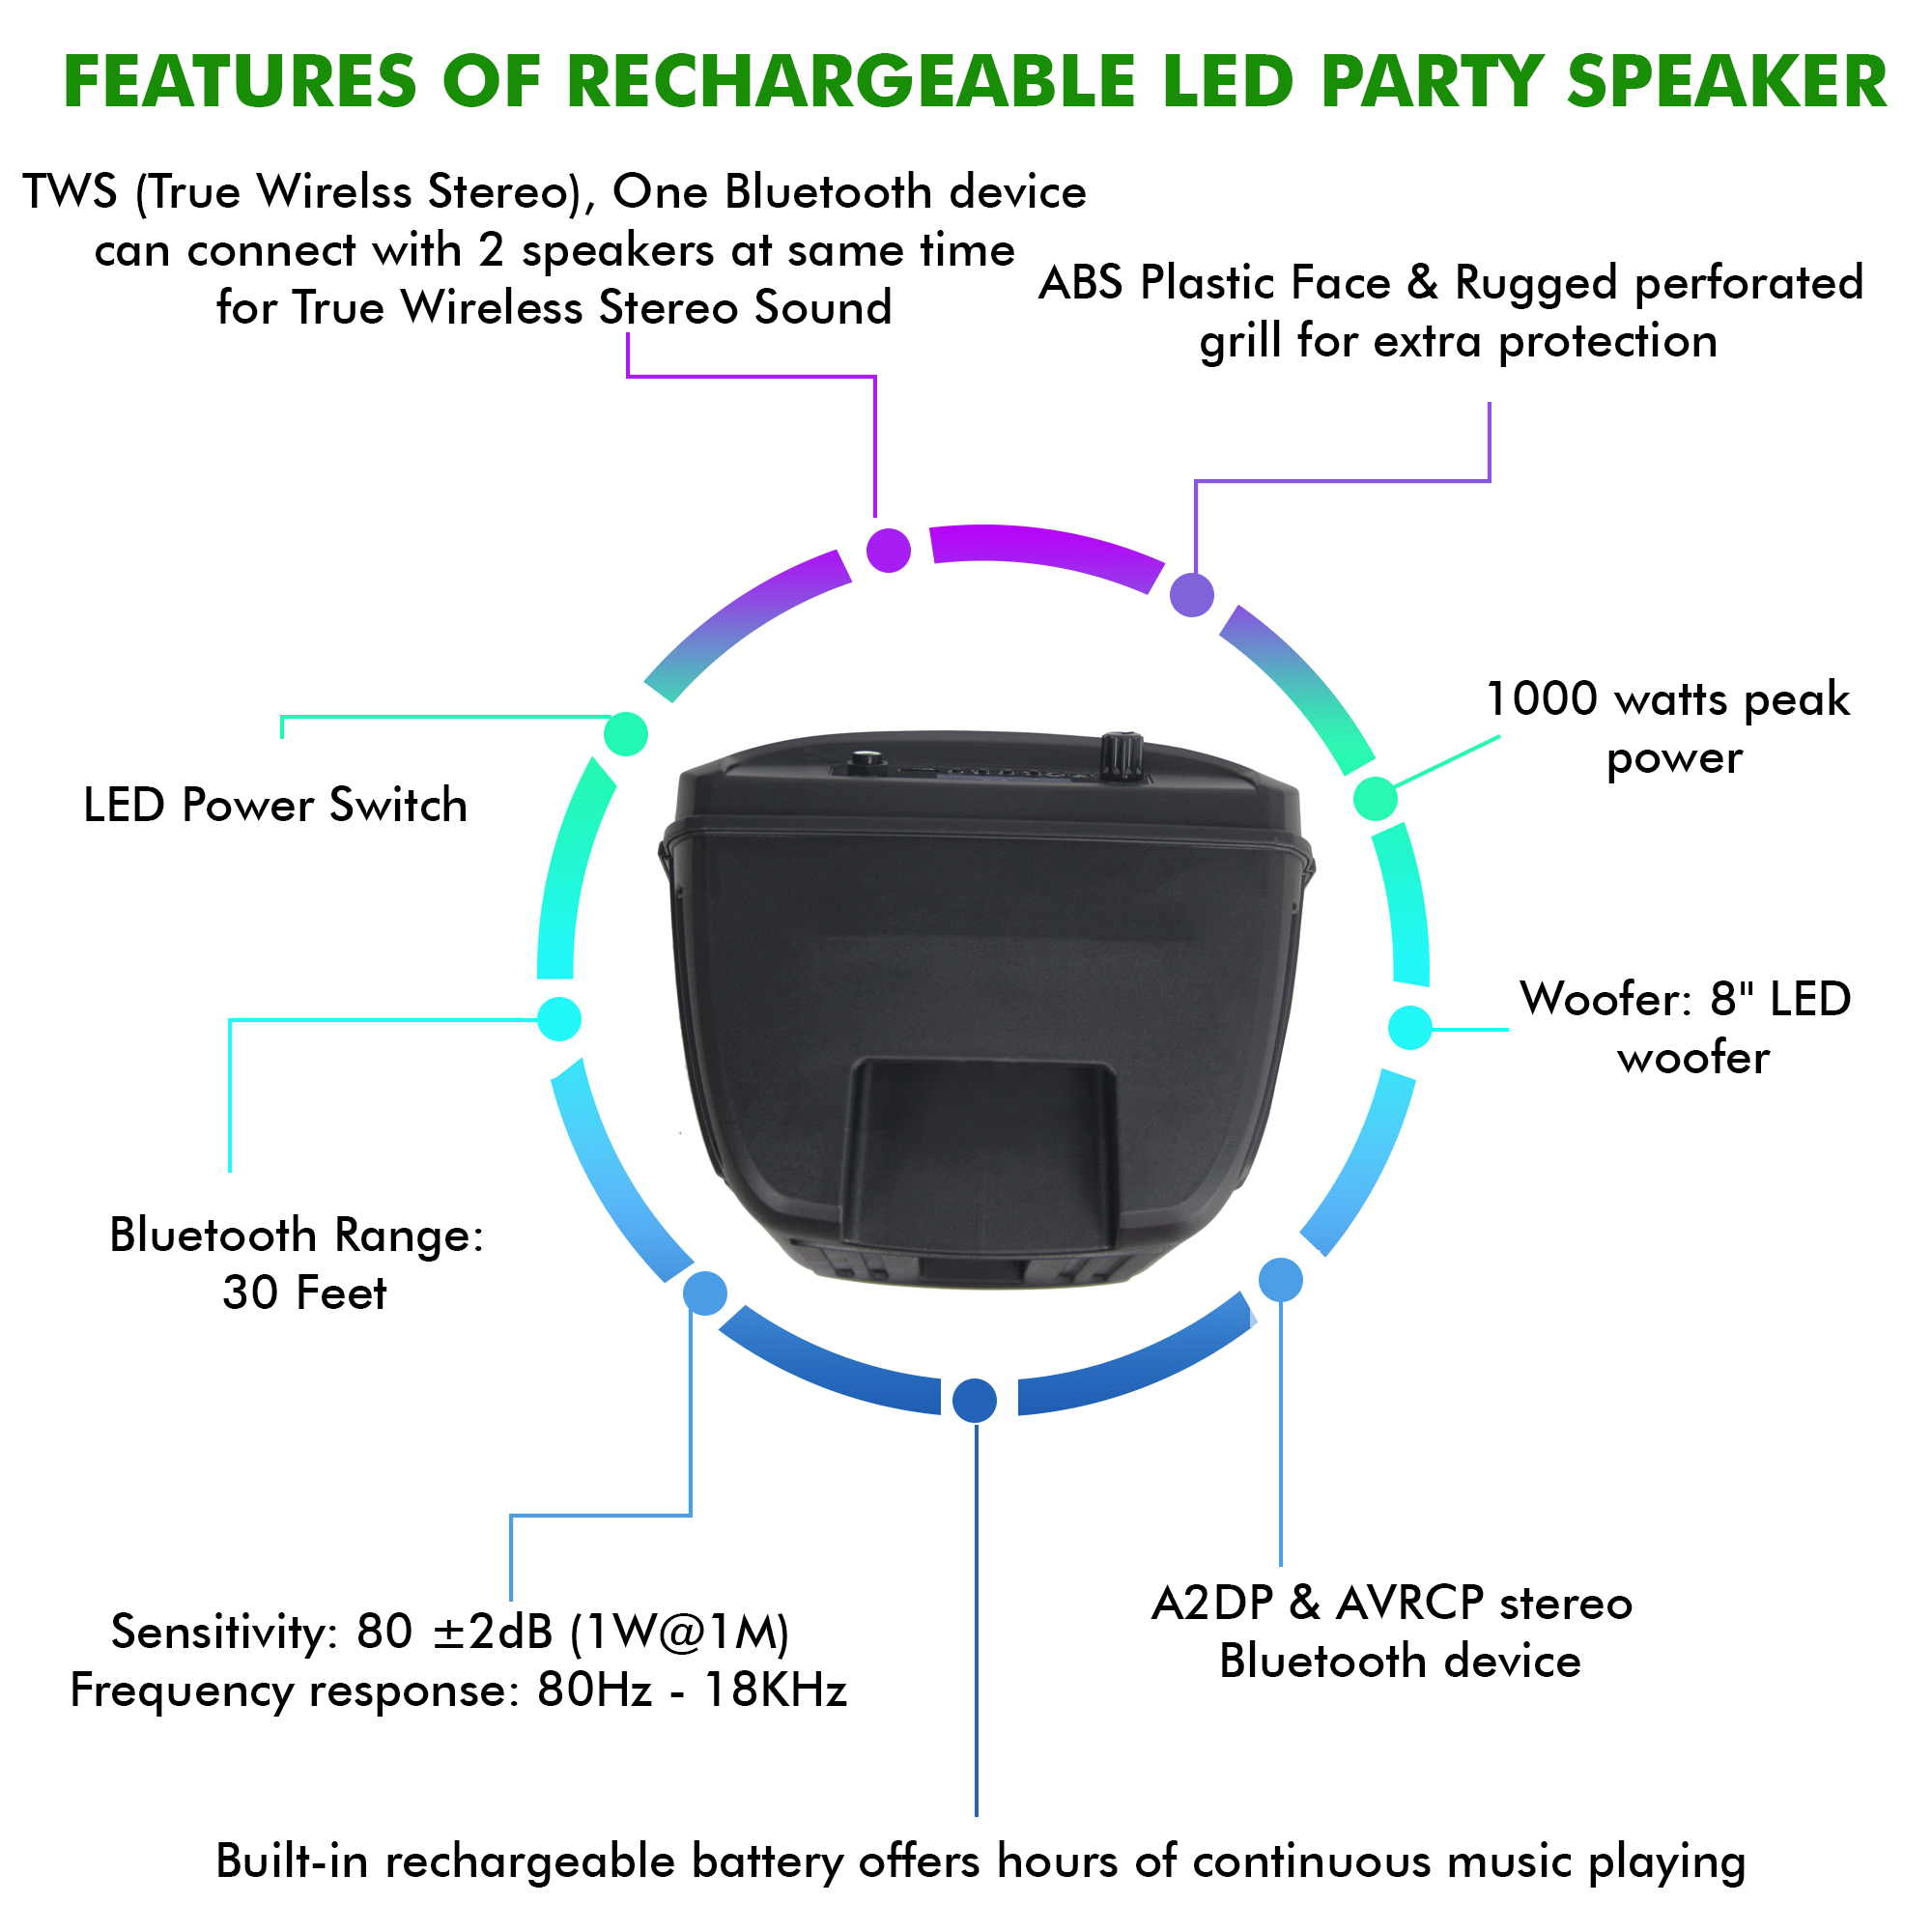 Technical Pro 3 Set  8" Portable 1000 W Bluetooth Speaker w/ Woofer & Tweeter Party PA LED Speaker w/ Bluetooth/USB Card Inputs - image 5 of 6